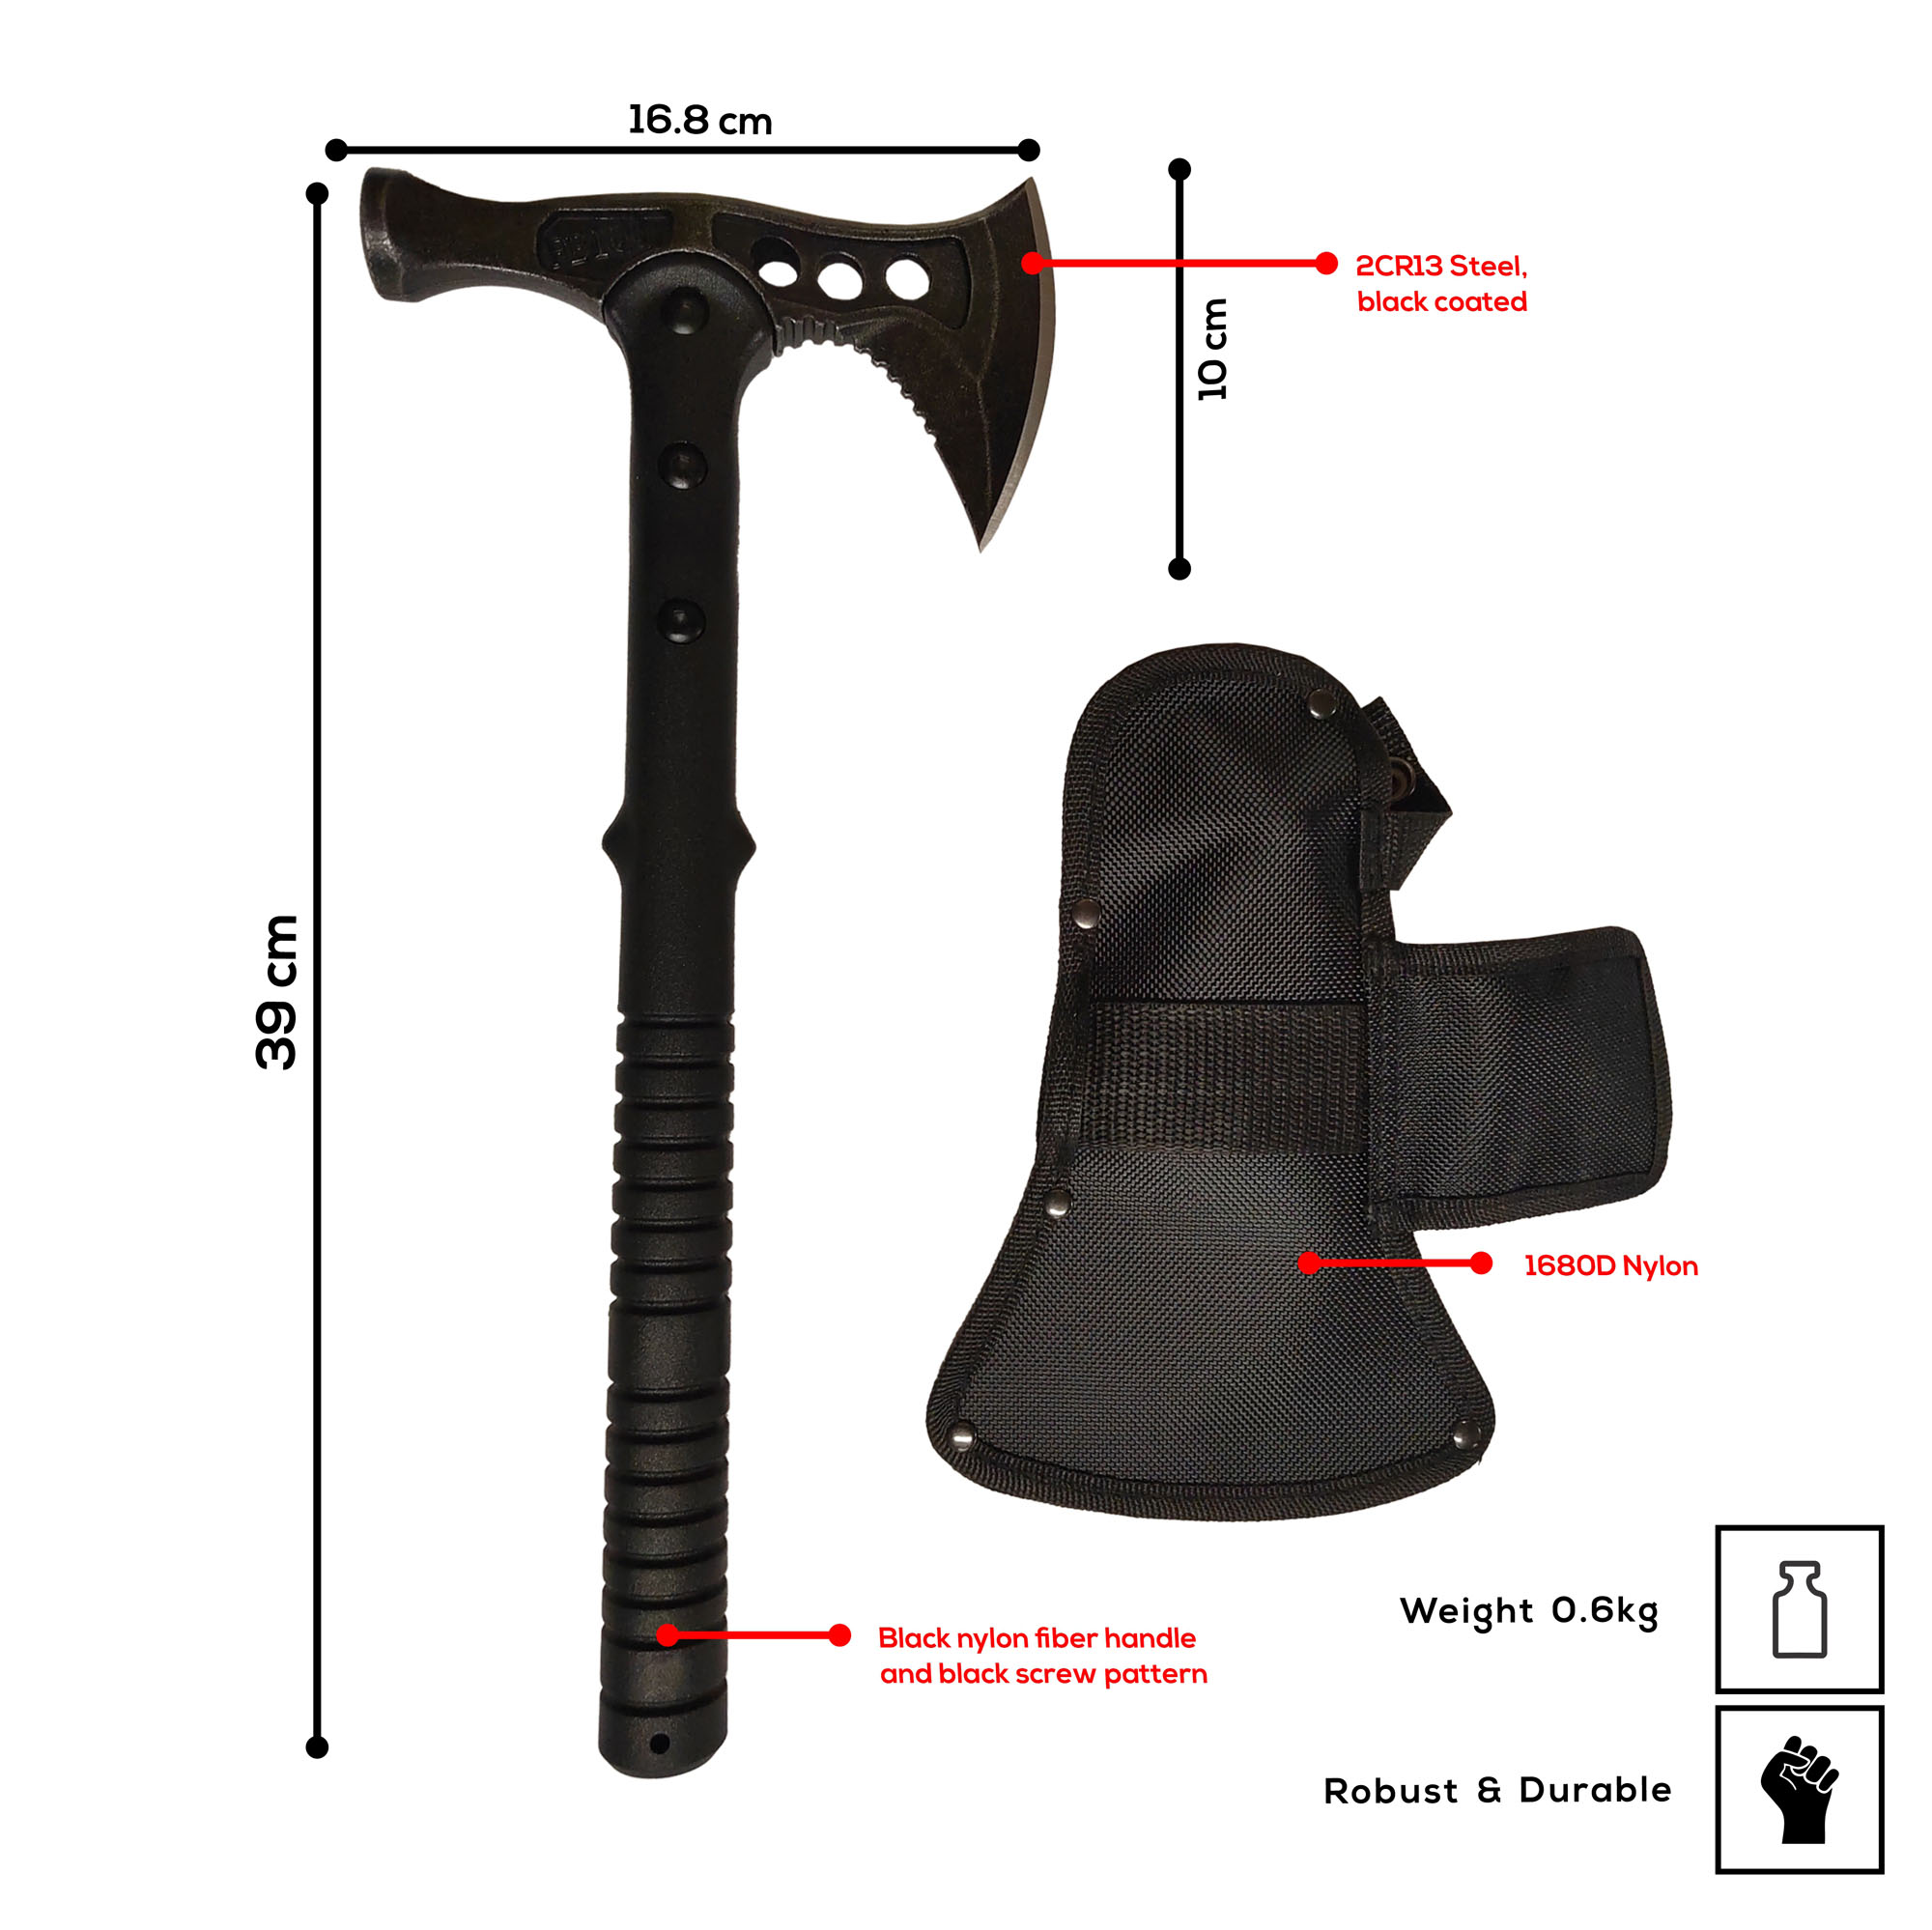 Outdoor axe with hammer head and scabbard